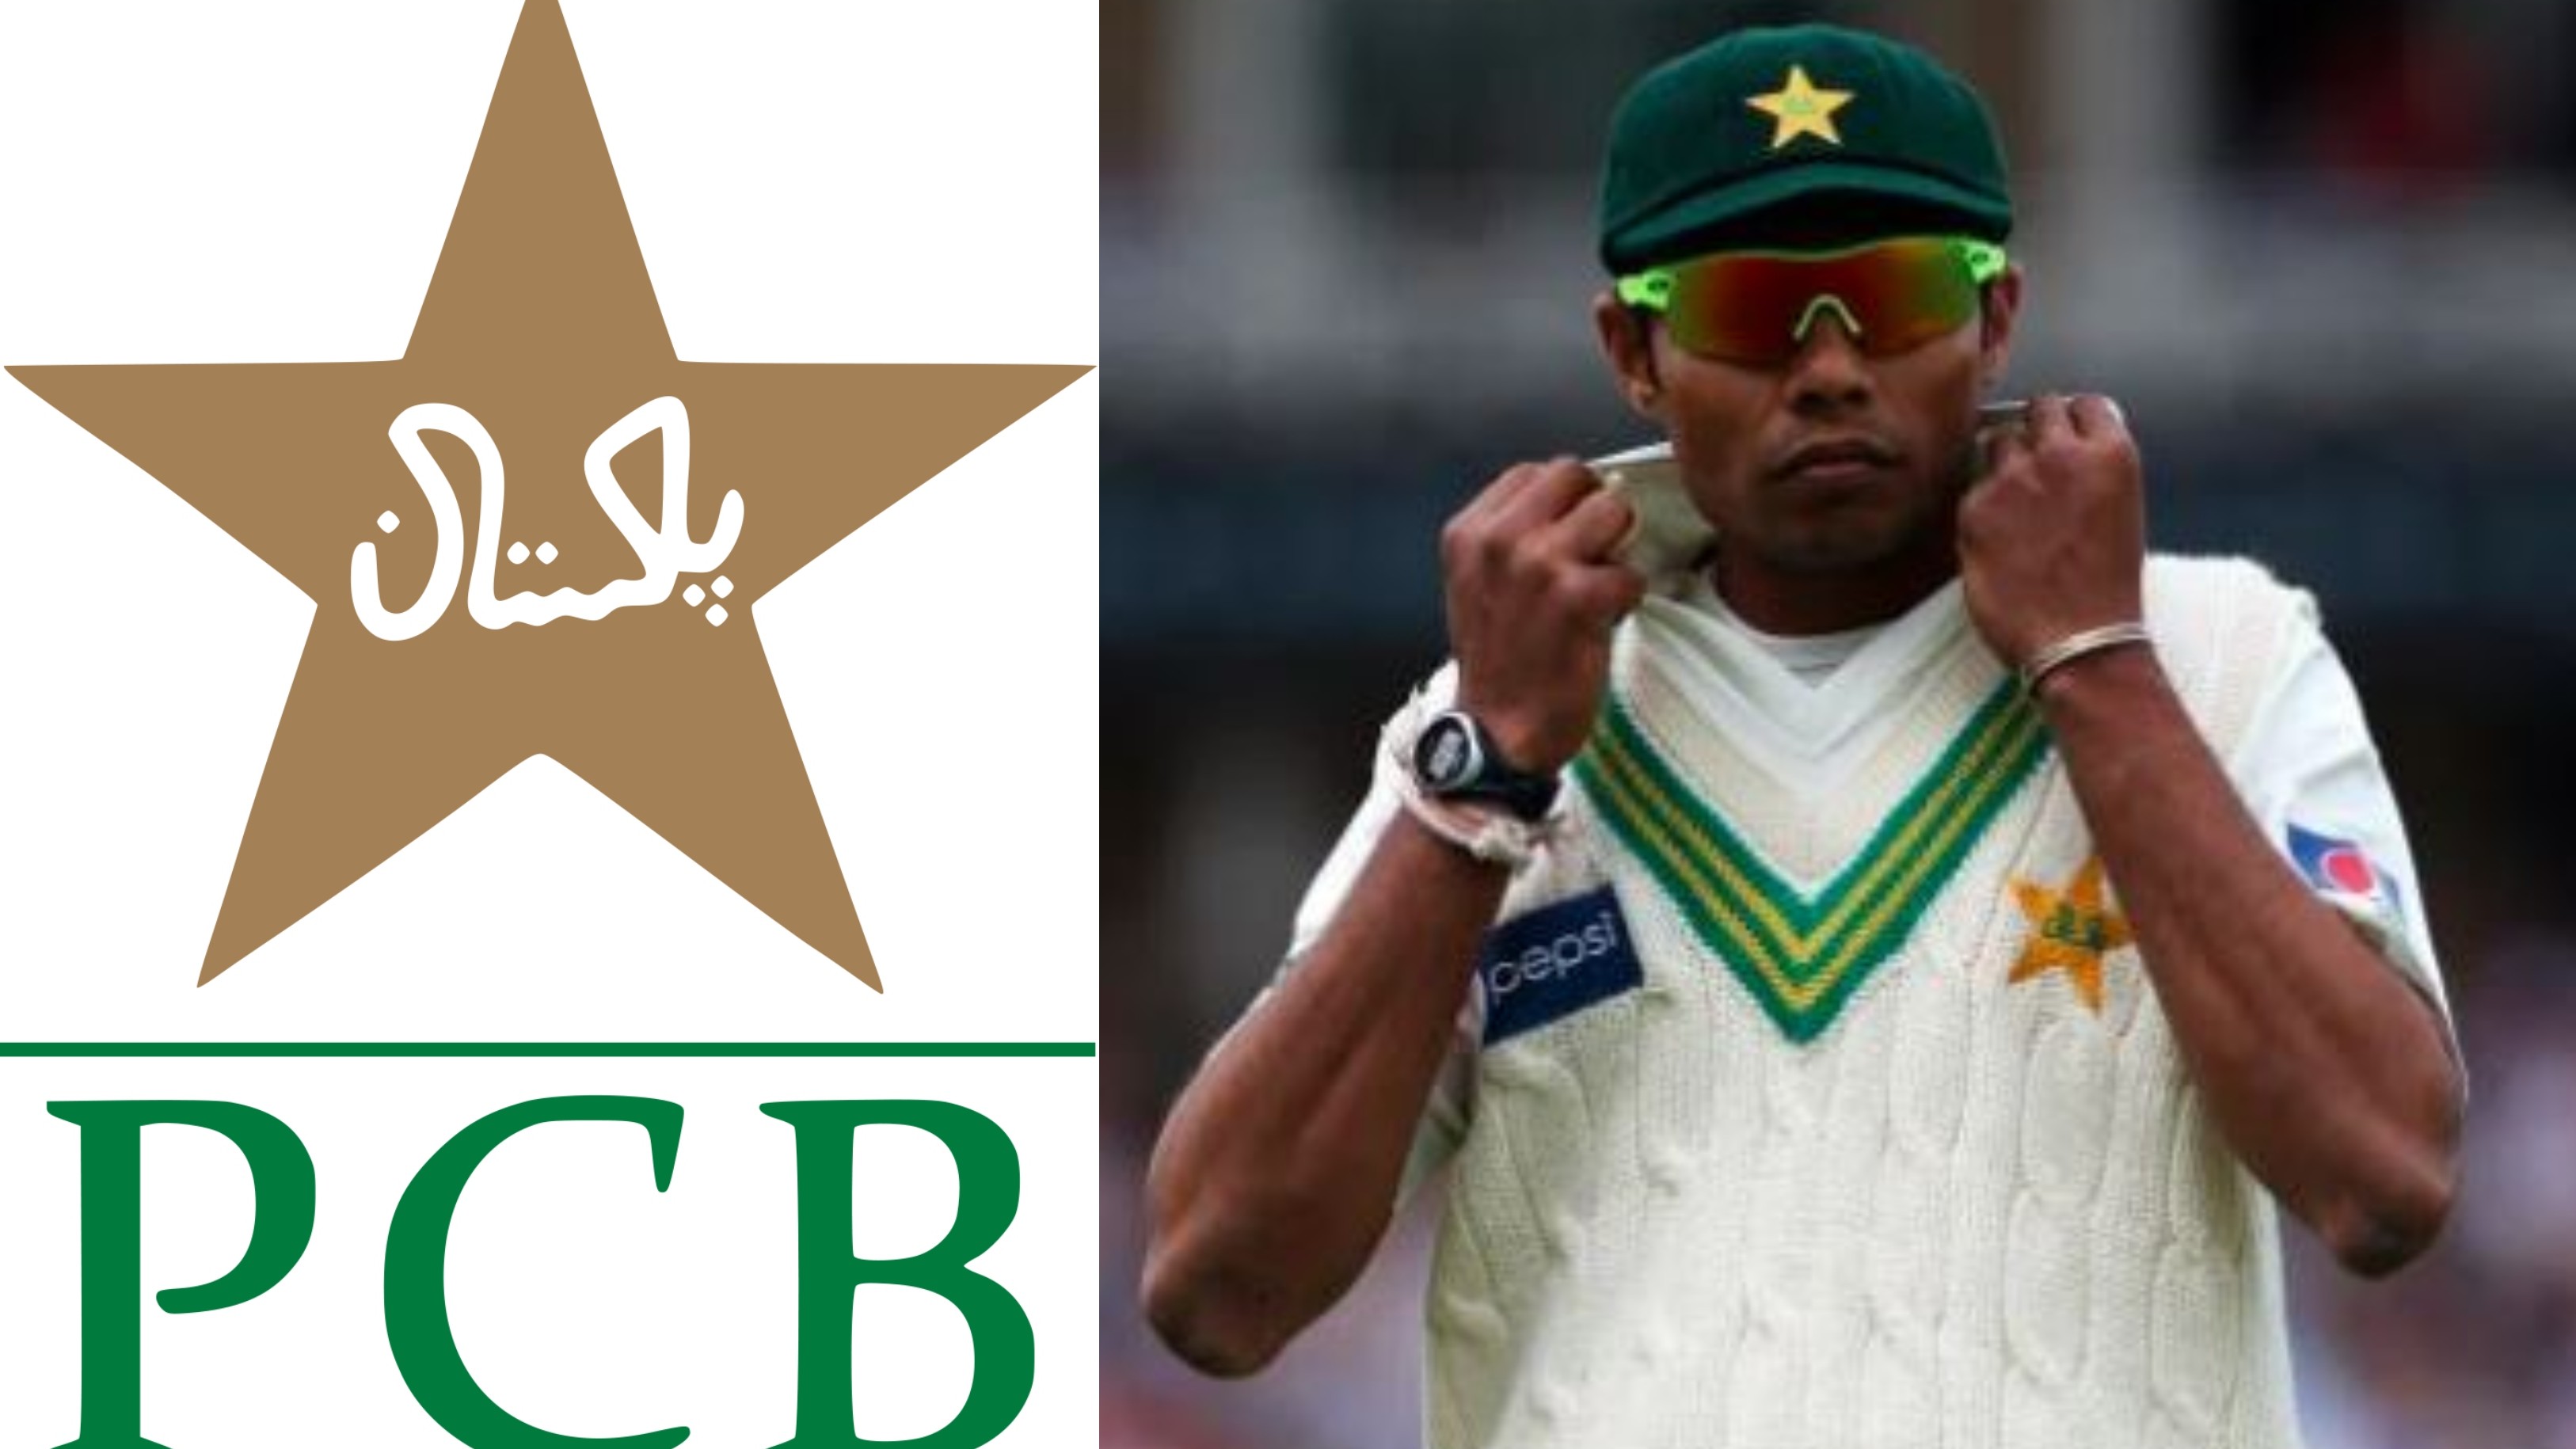 PCB tells Danish Kaneria to approach ECB if he wants to resume playing cricket